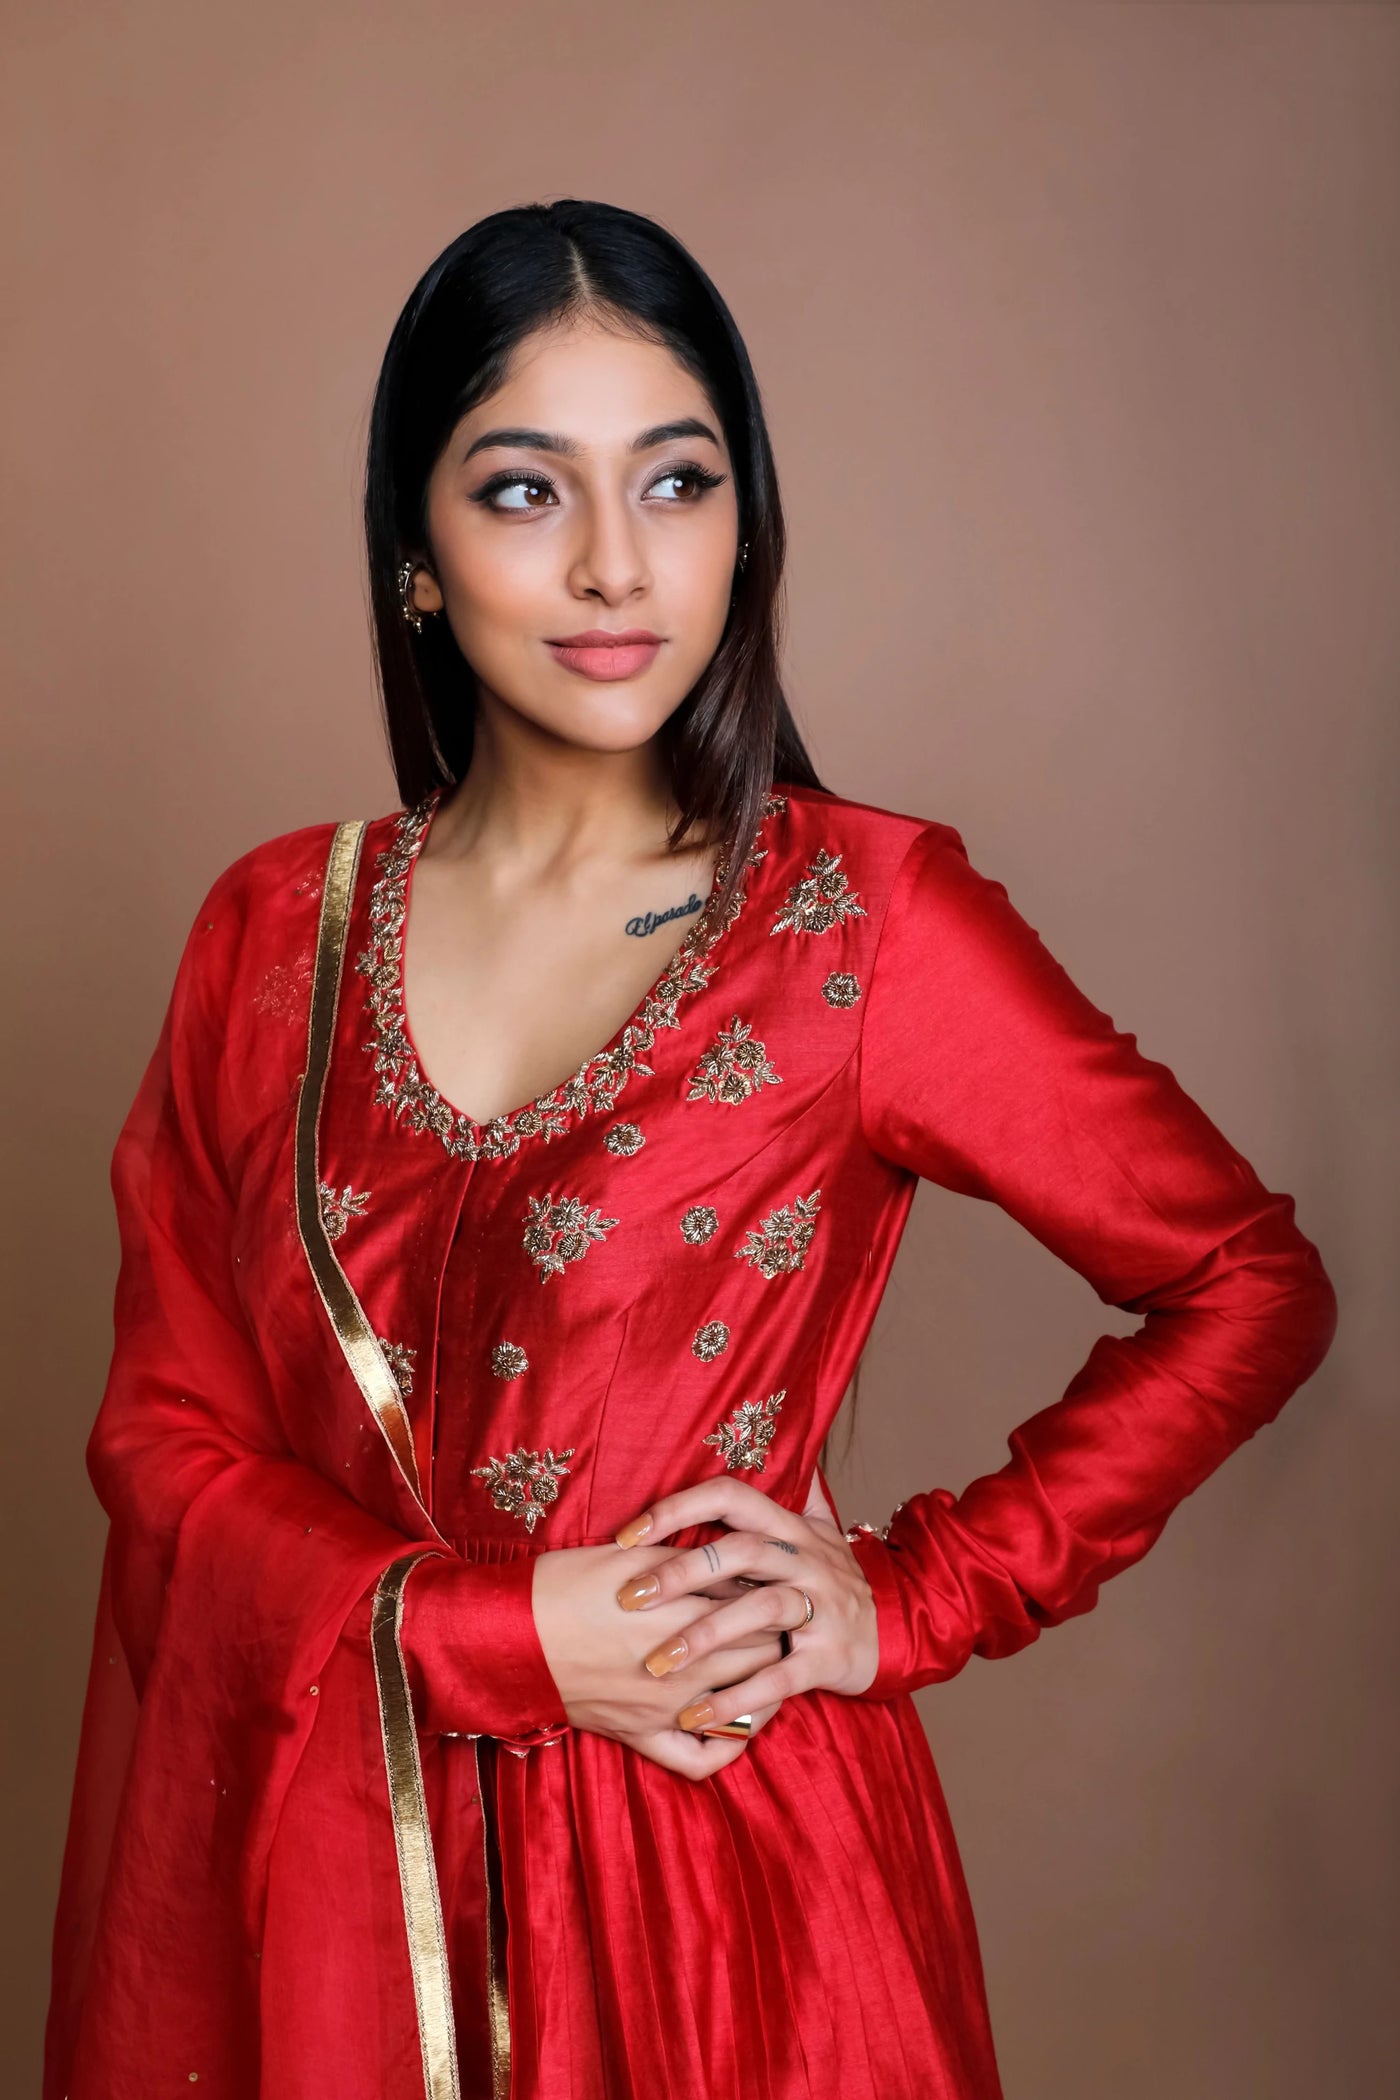 Red Antique Gold Pleated Anarkali Indian Clothing in Denver, CO, Aurora, CO, Boulder, CO, Fort Collins, CO, Colorado Springs, CO, Parker, CO, Highlands Ranch, CO, Cherry Creek, CO, Centennial, CO, and Longmont, CO. NATIONWIDE SHIPPING USA- India Fashion X